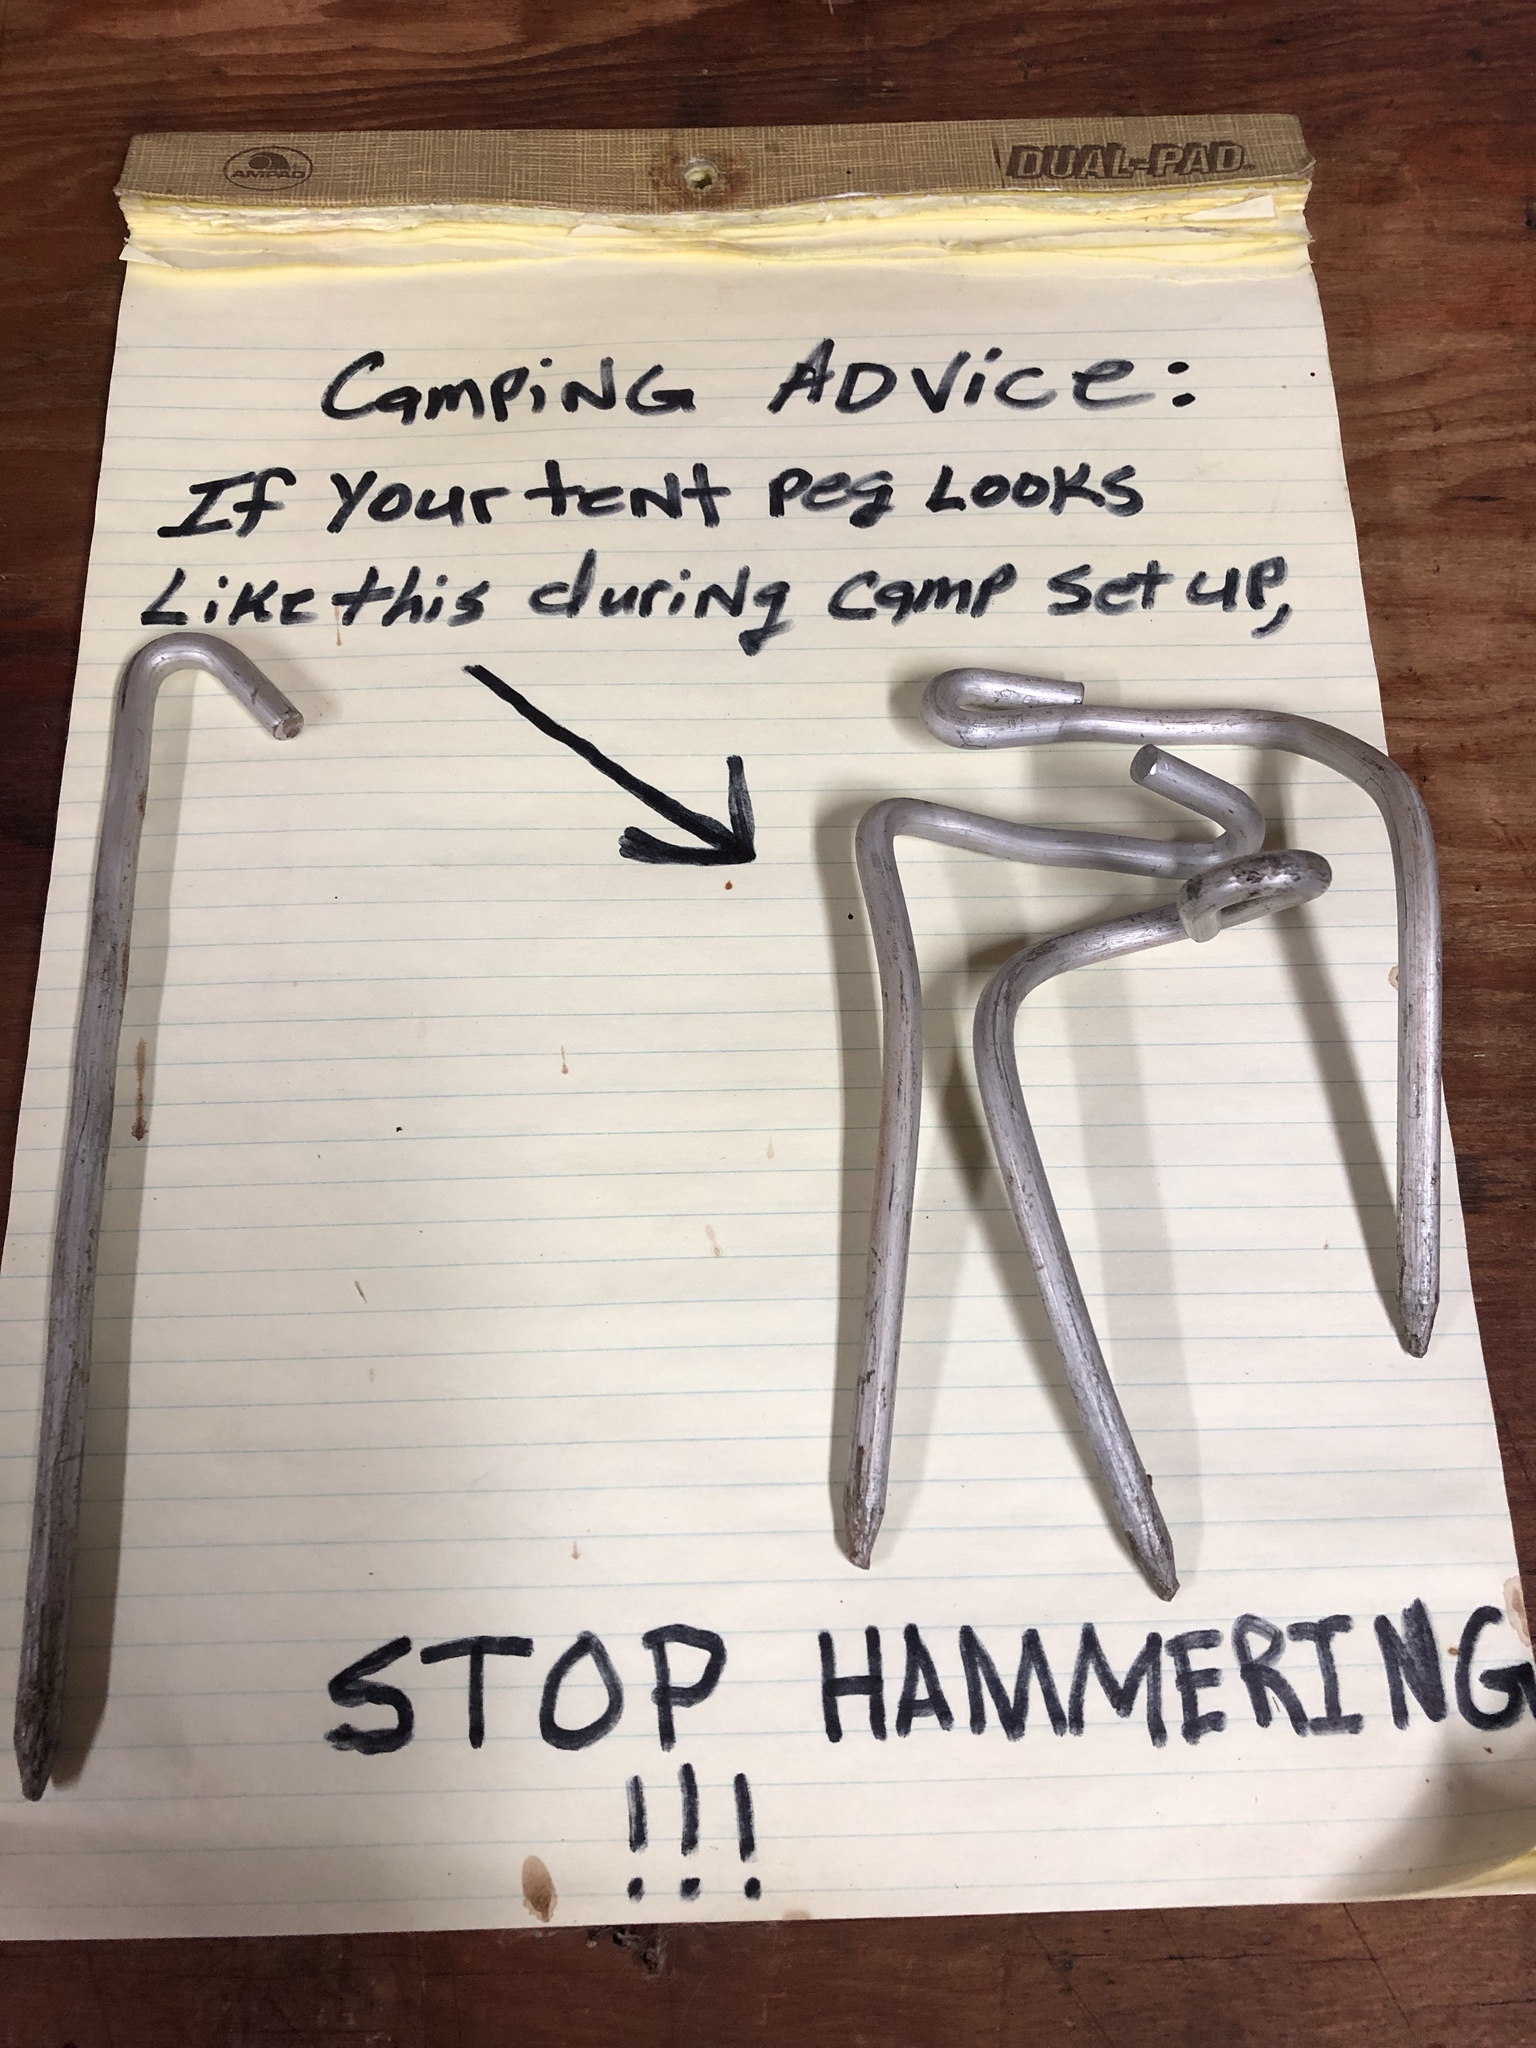 angle - NouatFr CampiNG ADVice If your tent Peg Looks this during Camp set up Stop Hammering